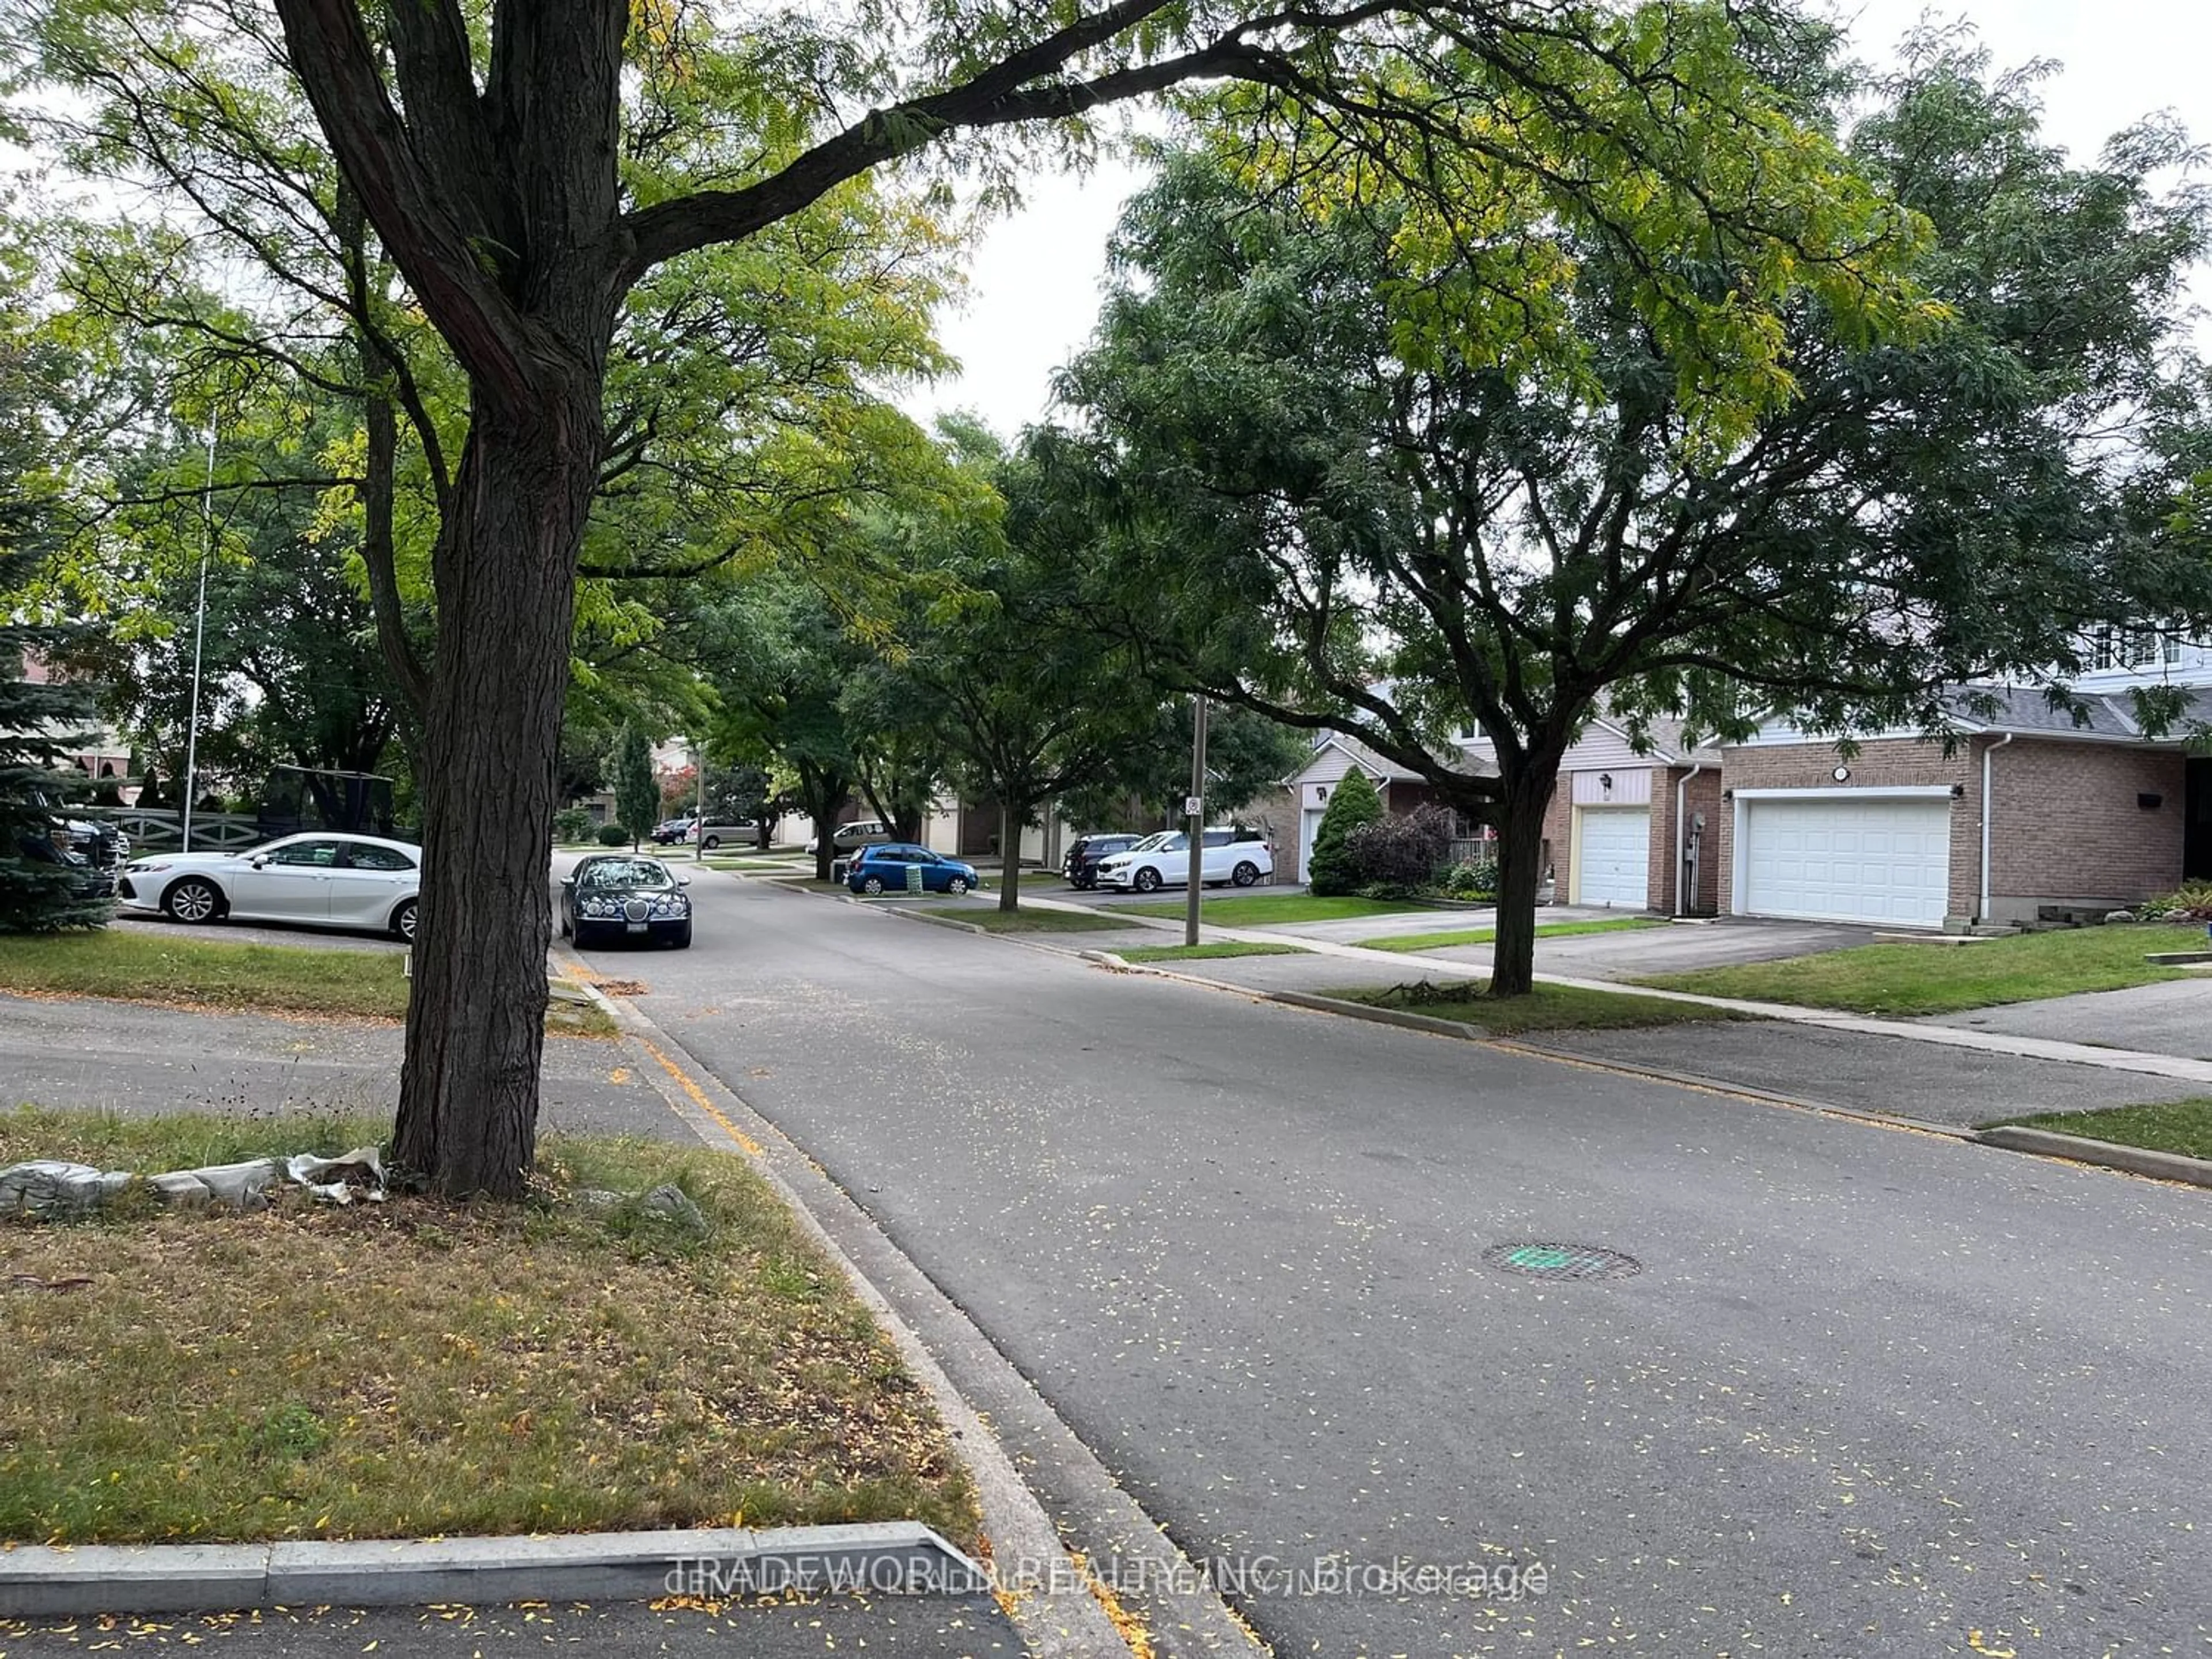 A view of a street for 122 Tamarack Dr, Markham Ontario L3T 4X4